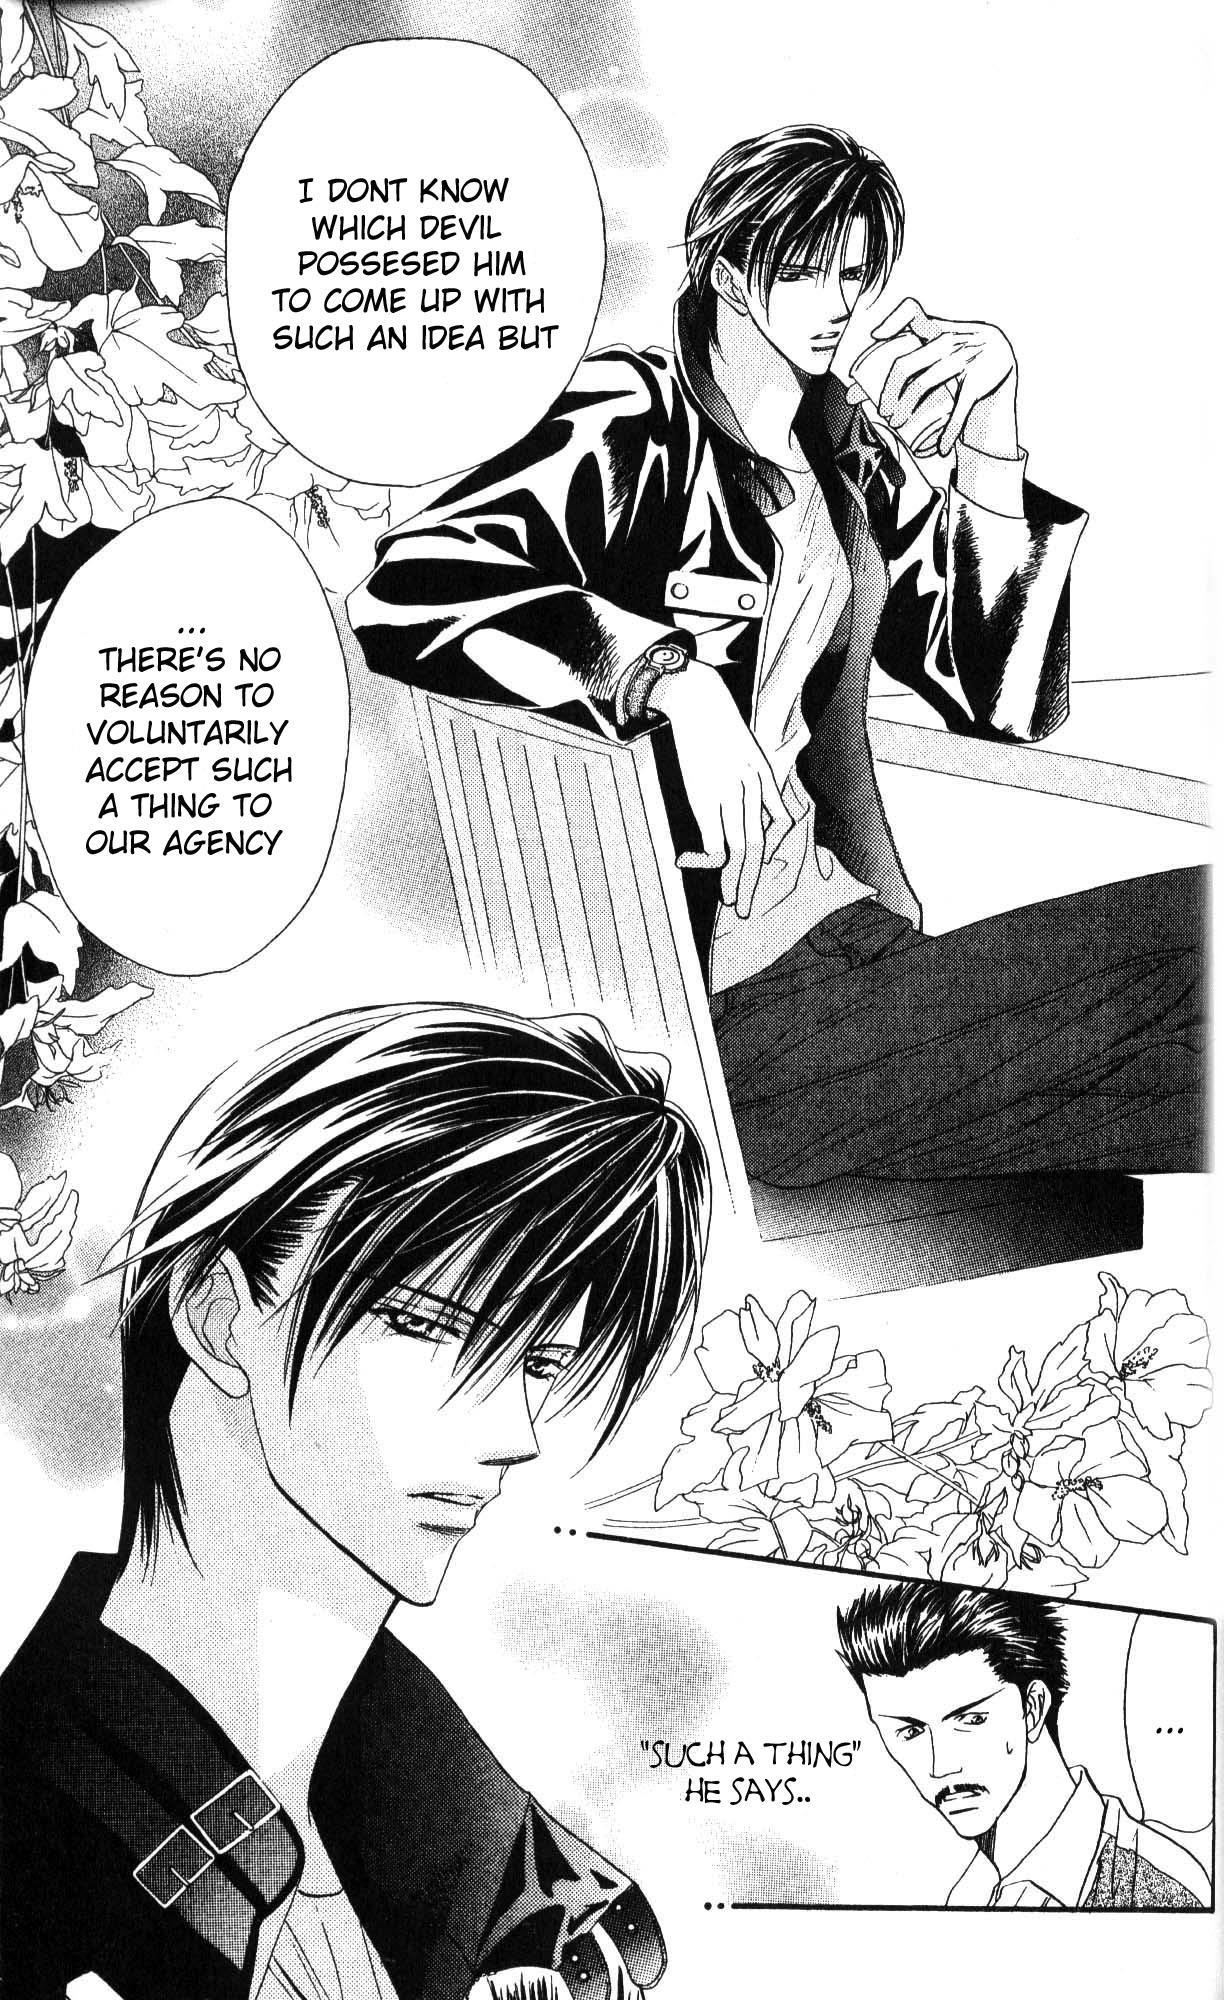 Skip Beat!, Chapter 7 That Name is Taboo image 07